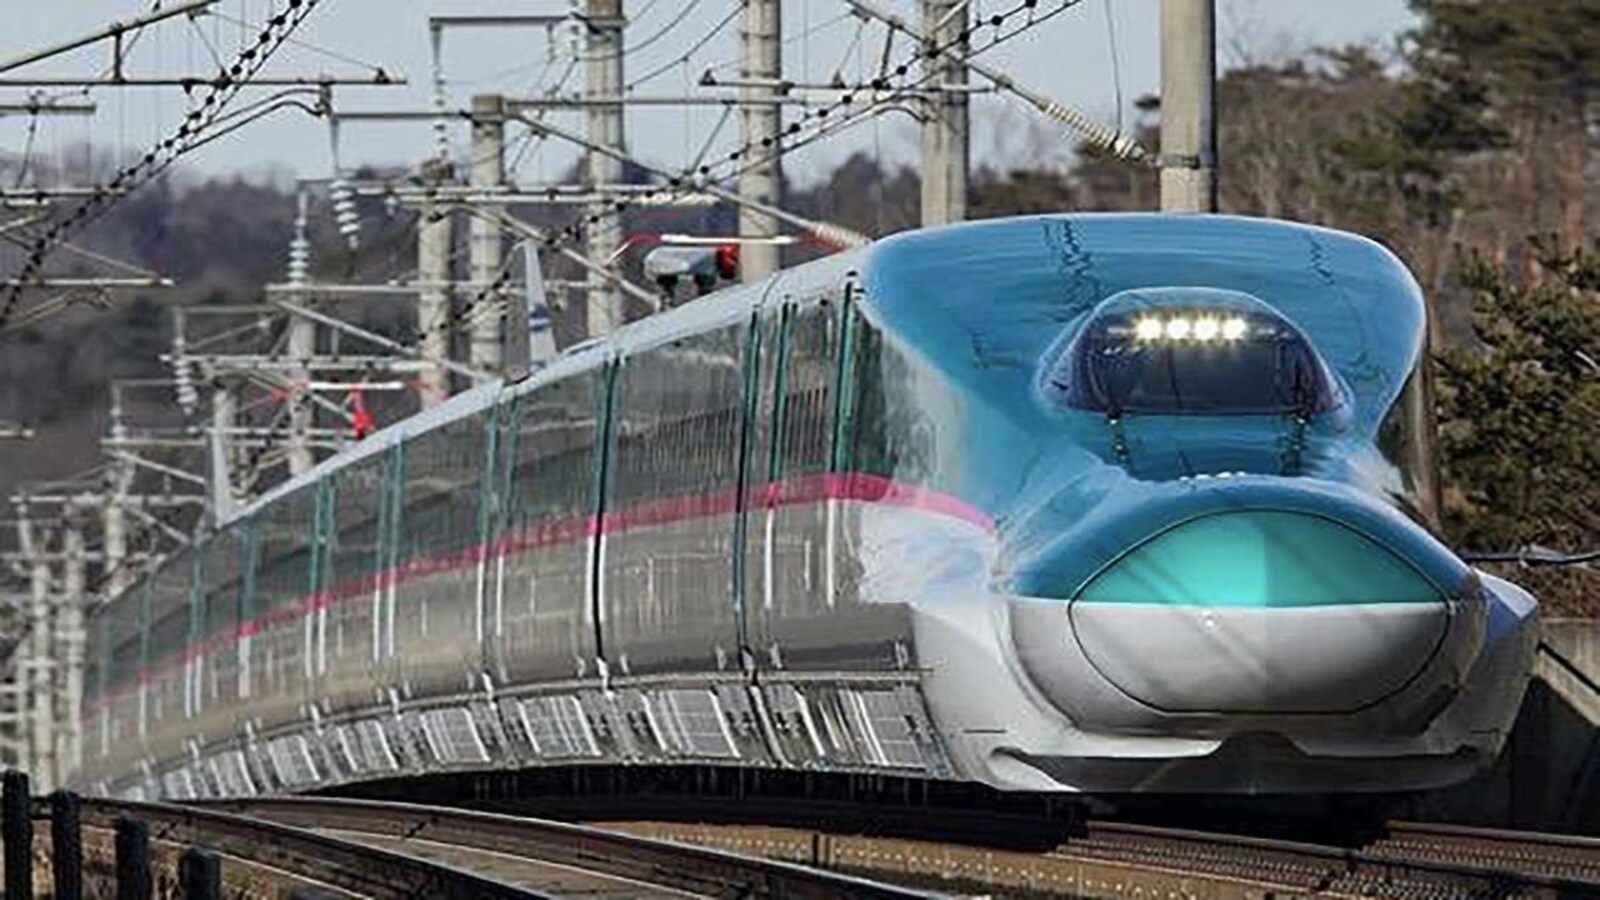 India confident of running first bullet train by 2026, but only in